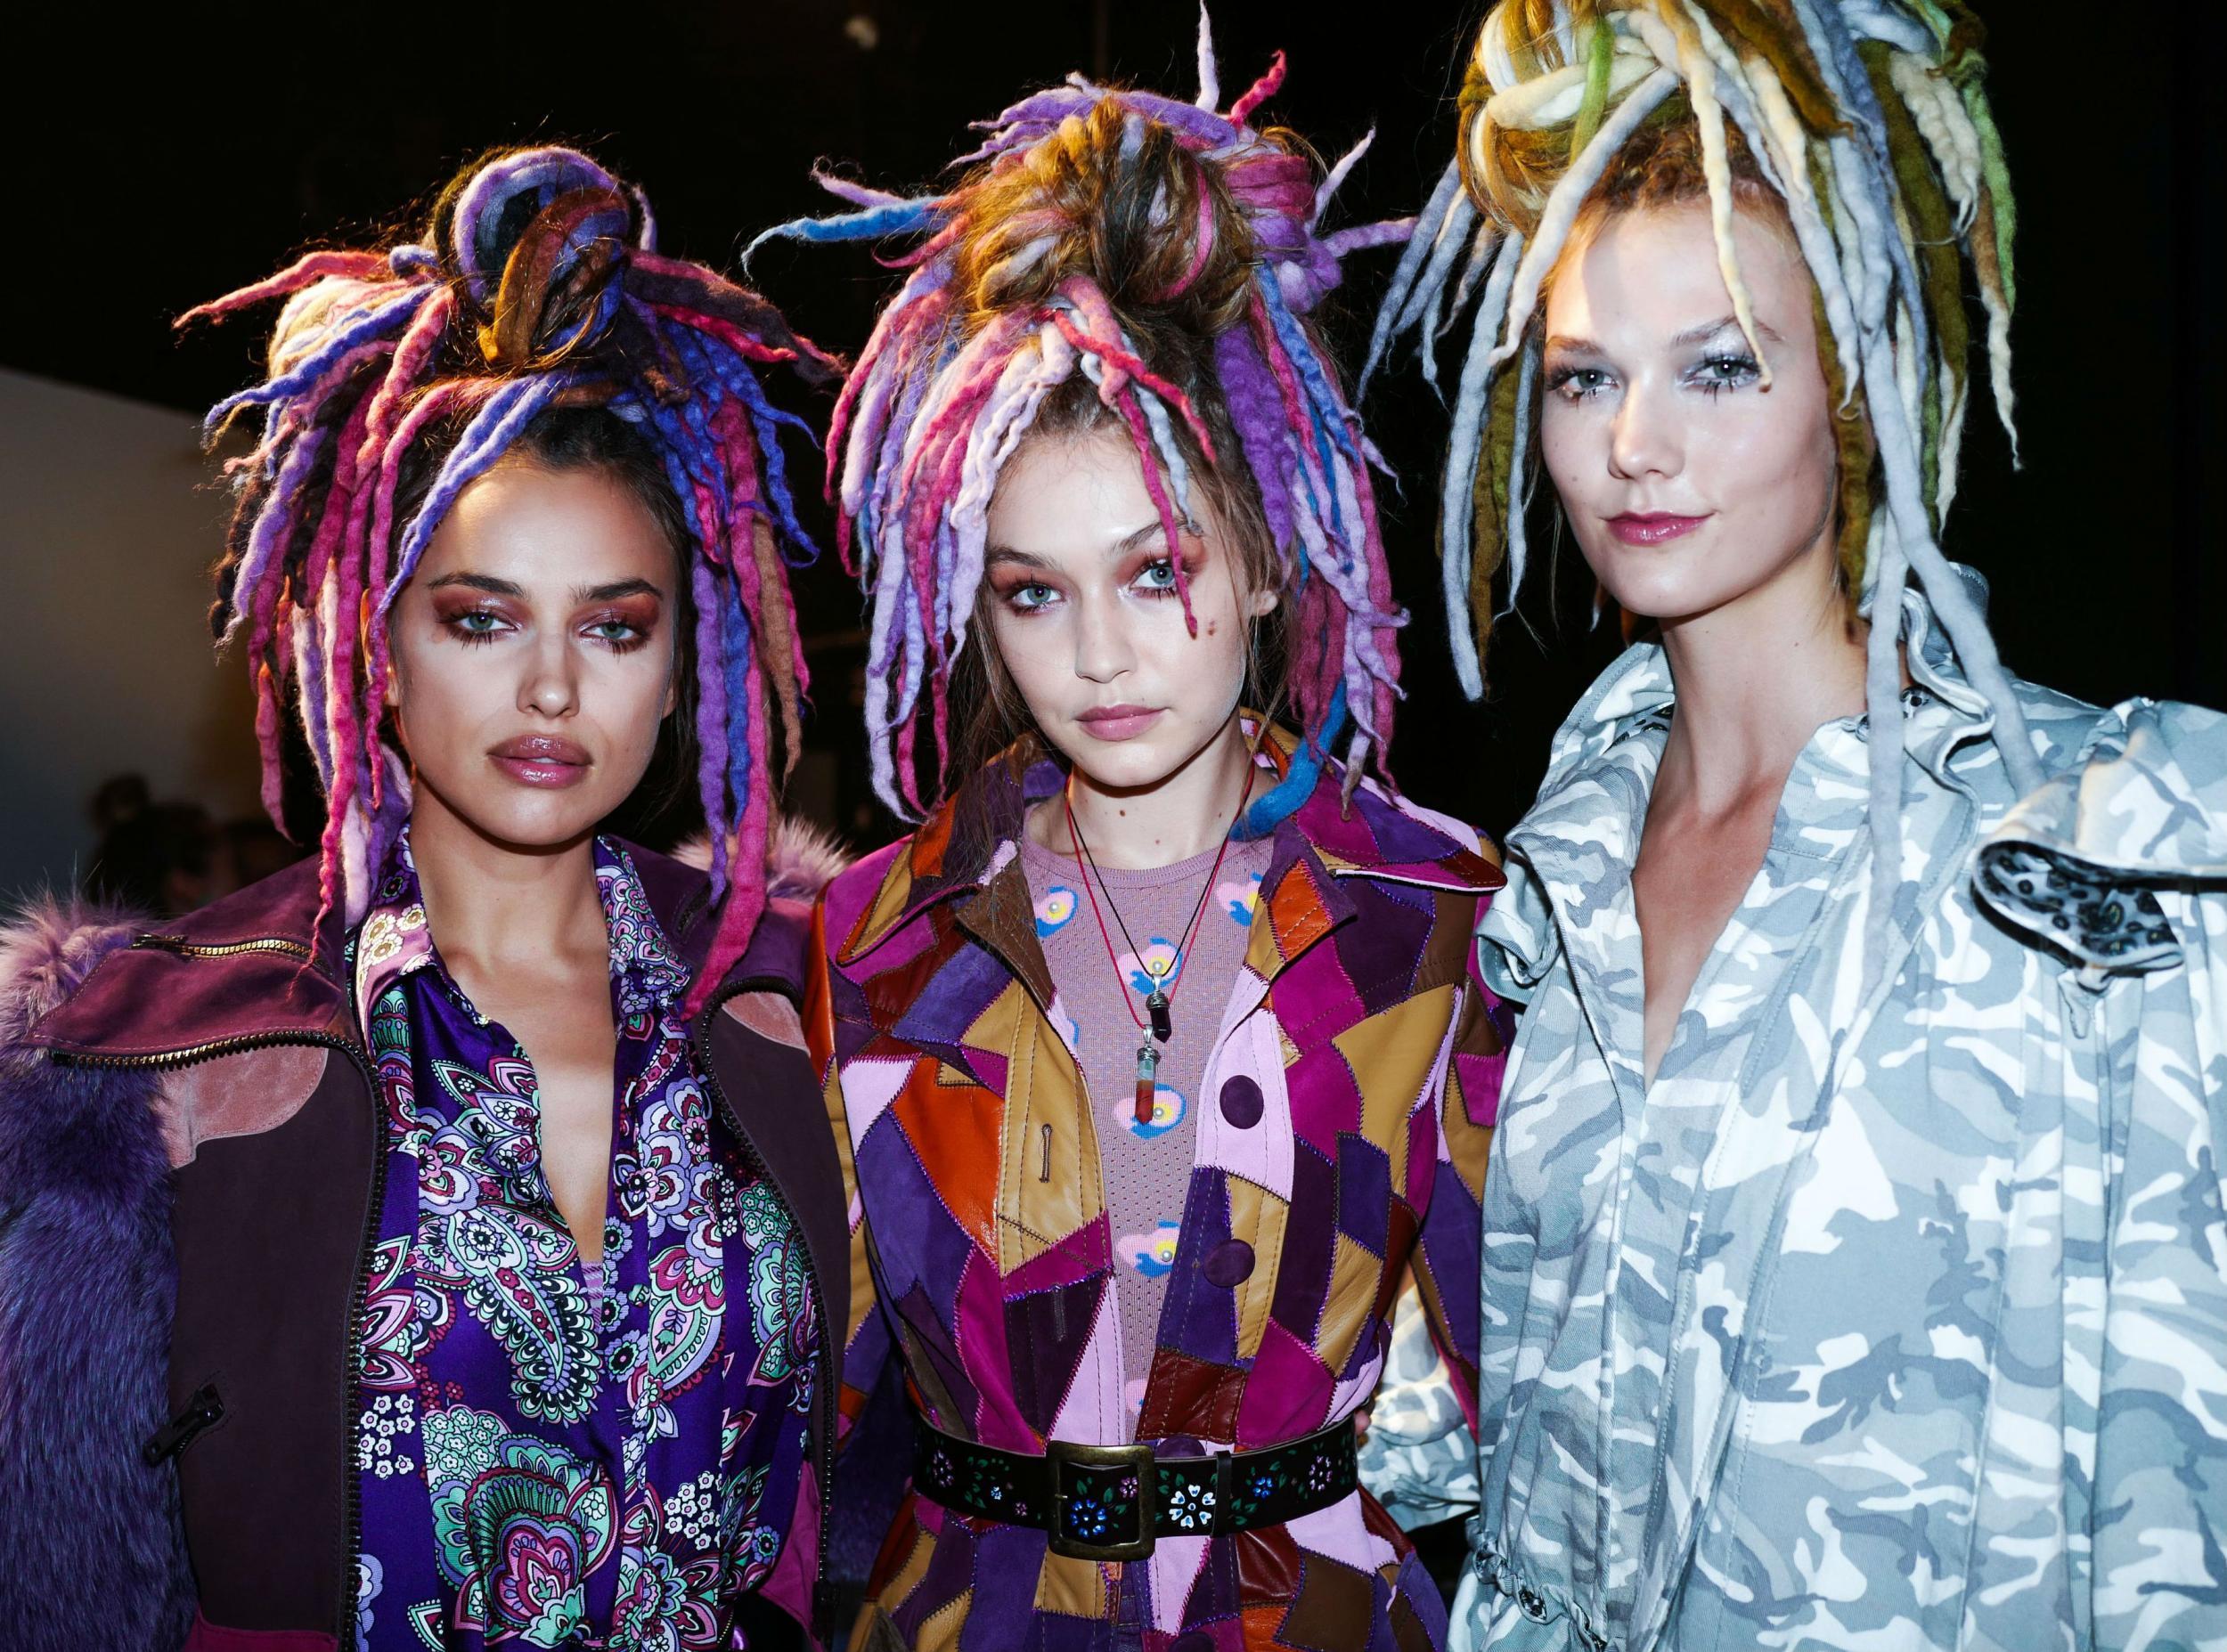 Marc Jacobs Just Staged the First Post-Instagram Fashion Show